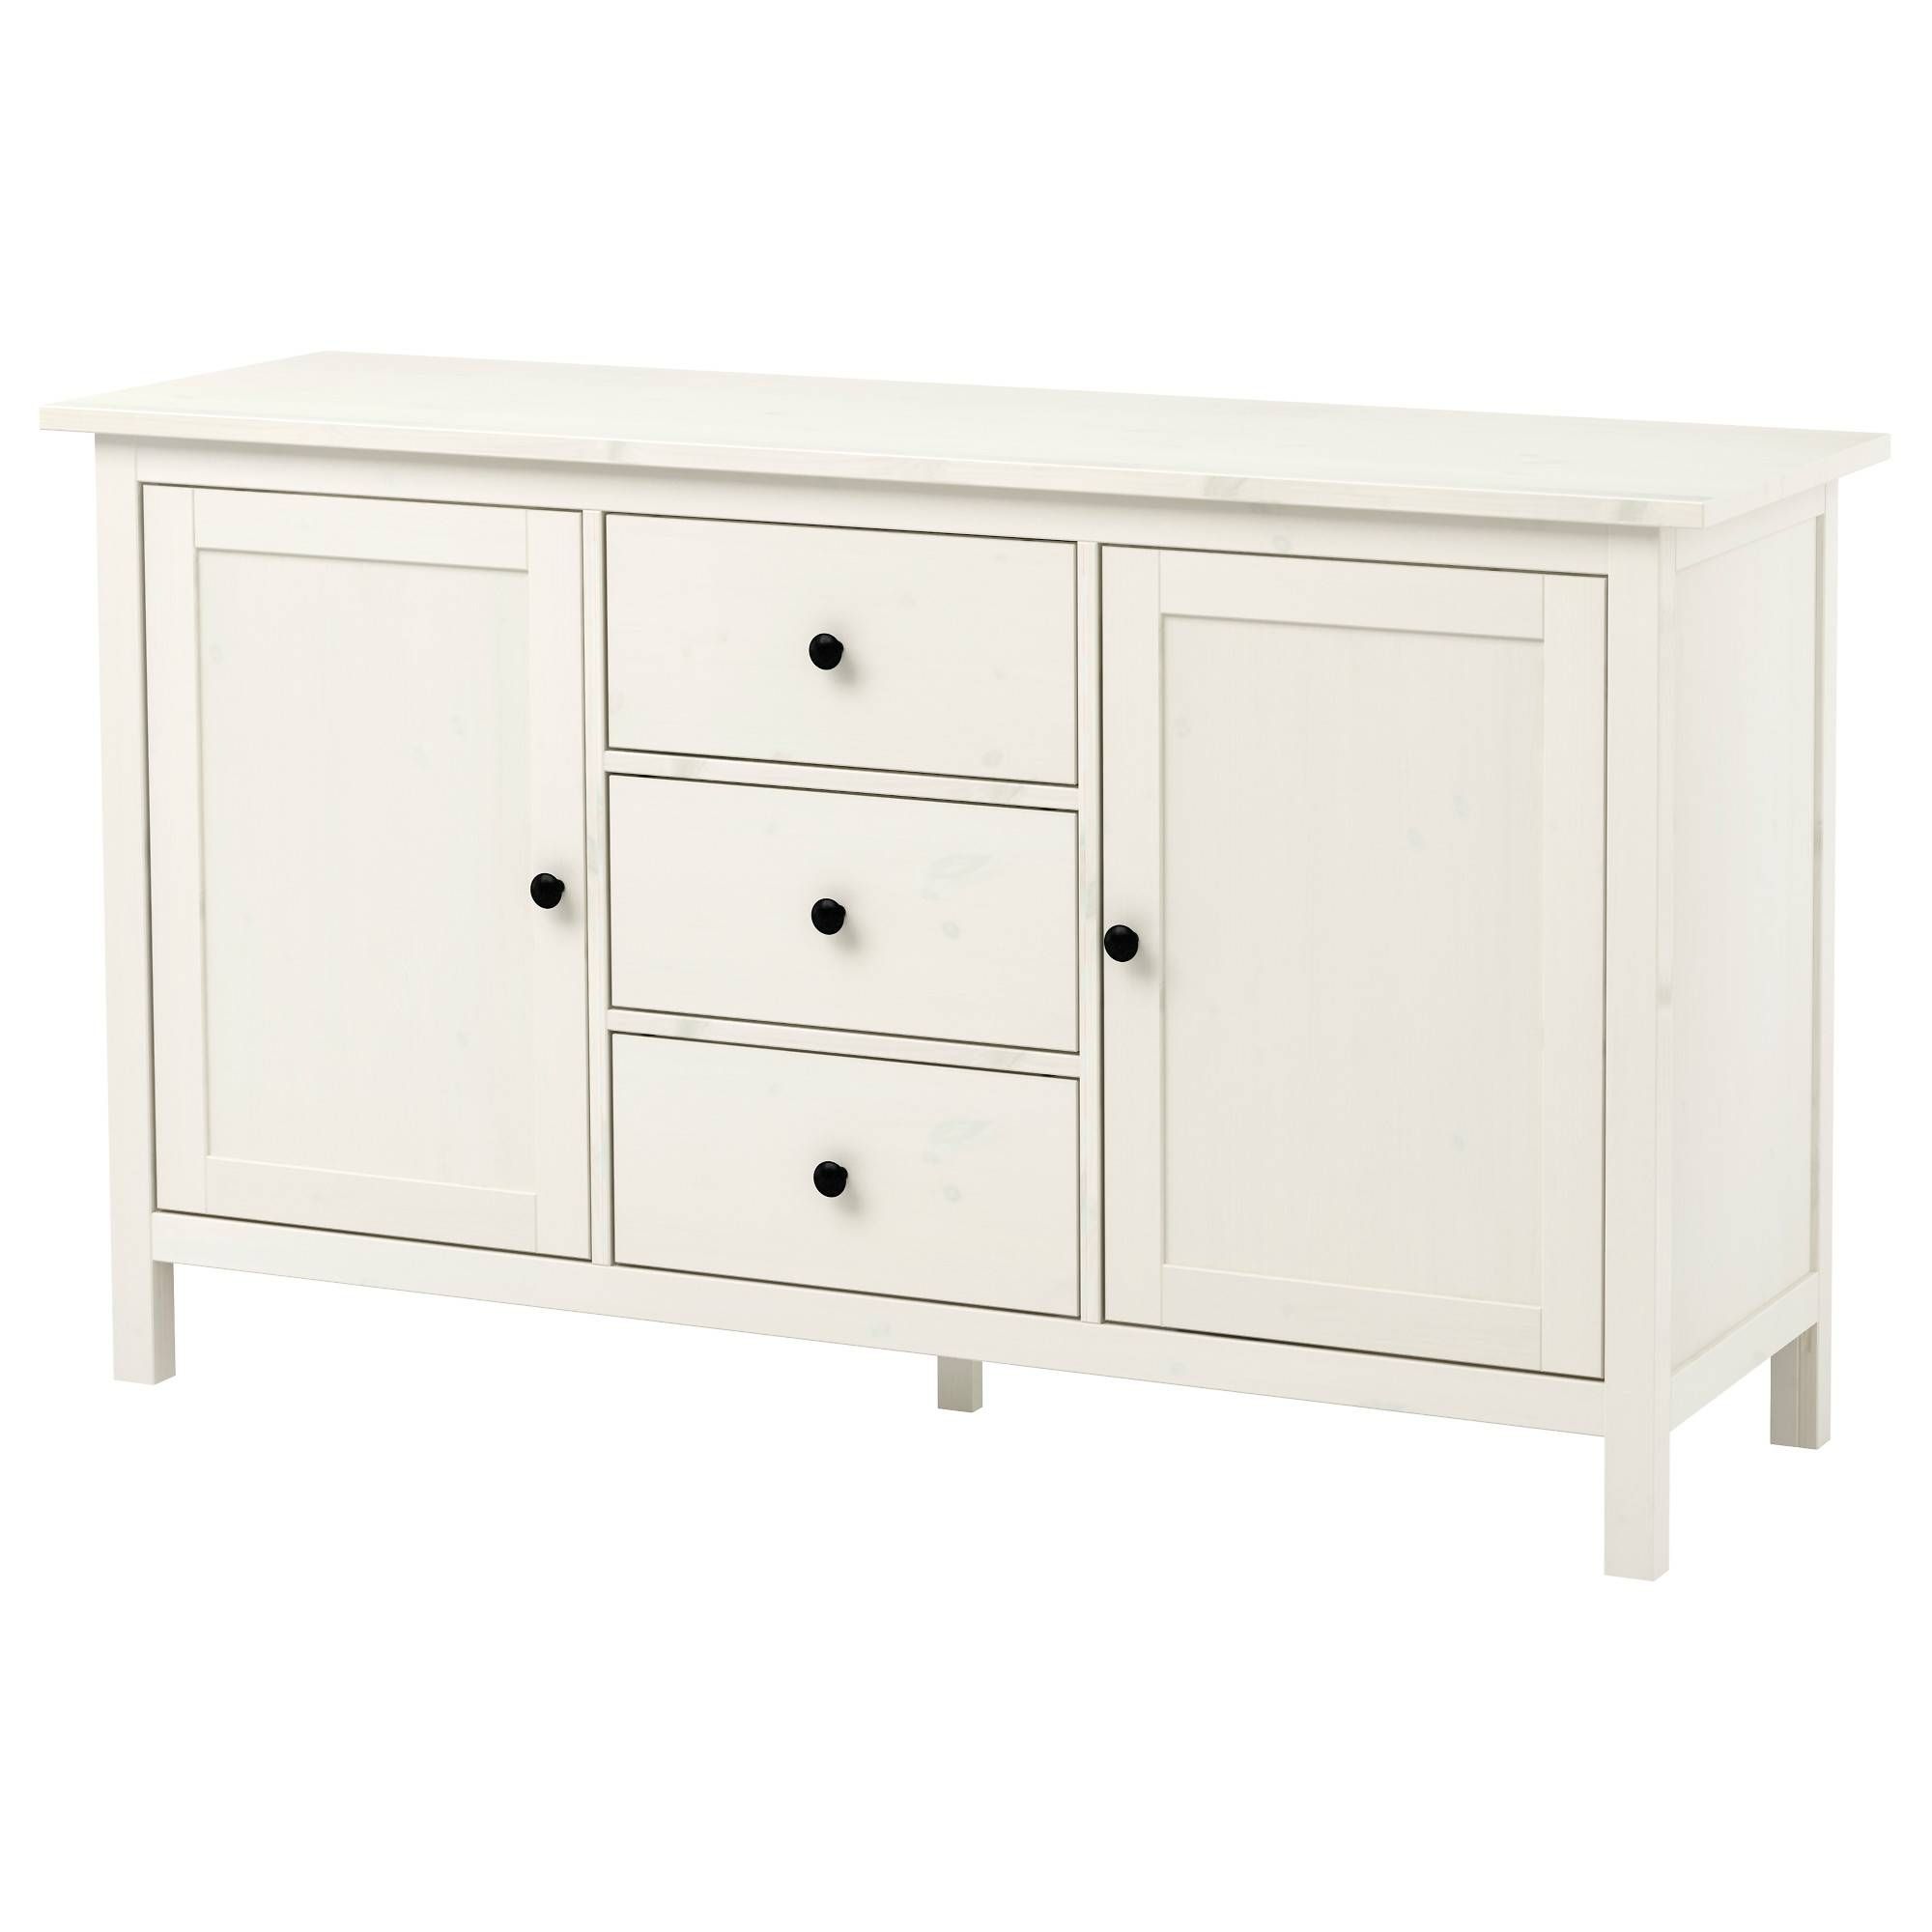 Buffet Tables & Sideboards – Ikea Throughout White Sideboard Cabinet (View 4 of 20)